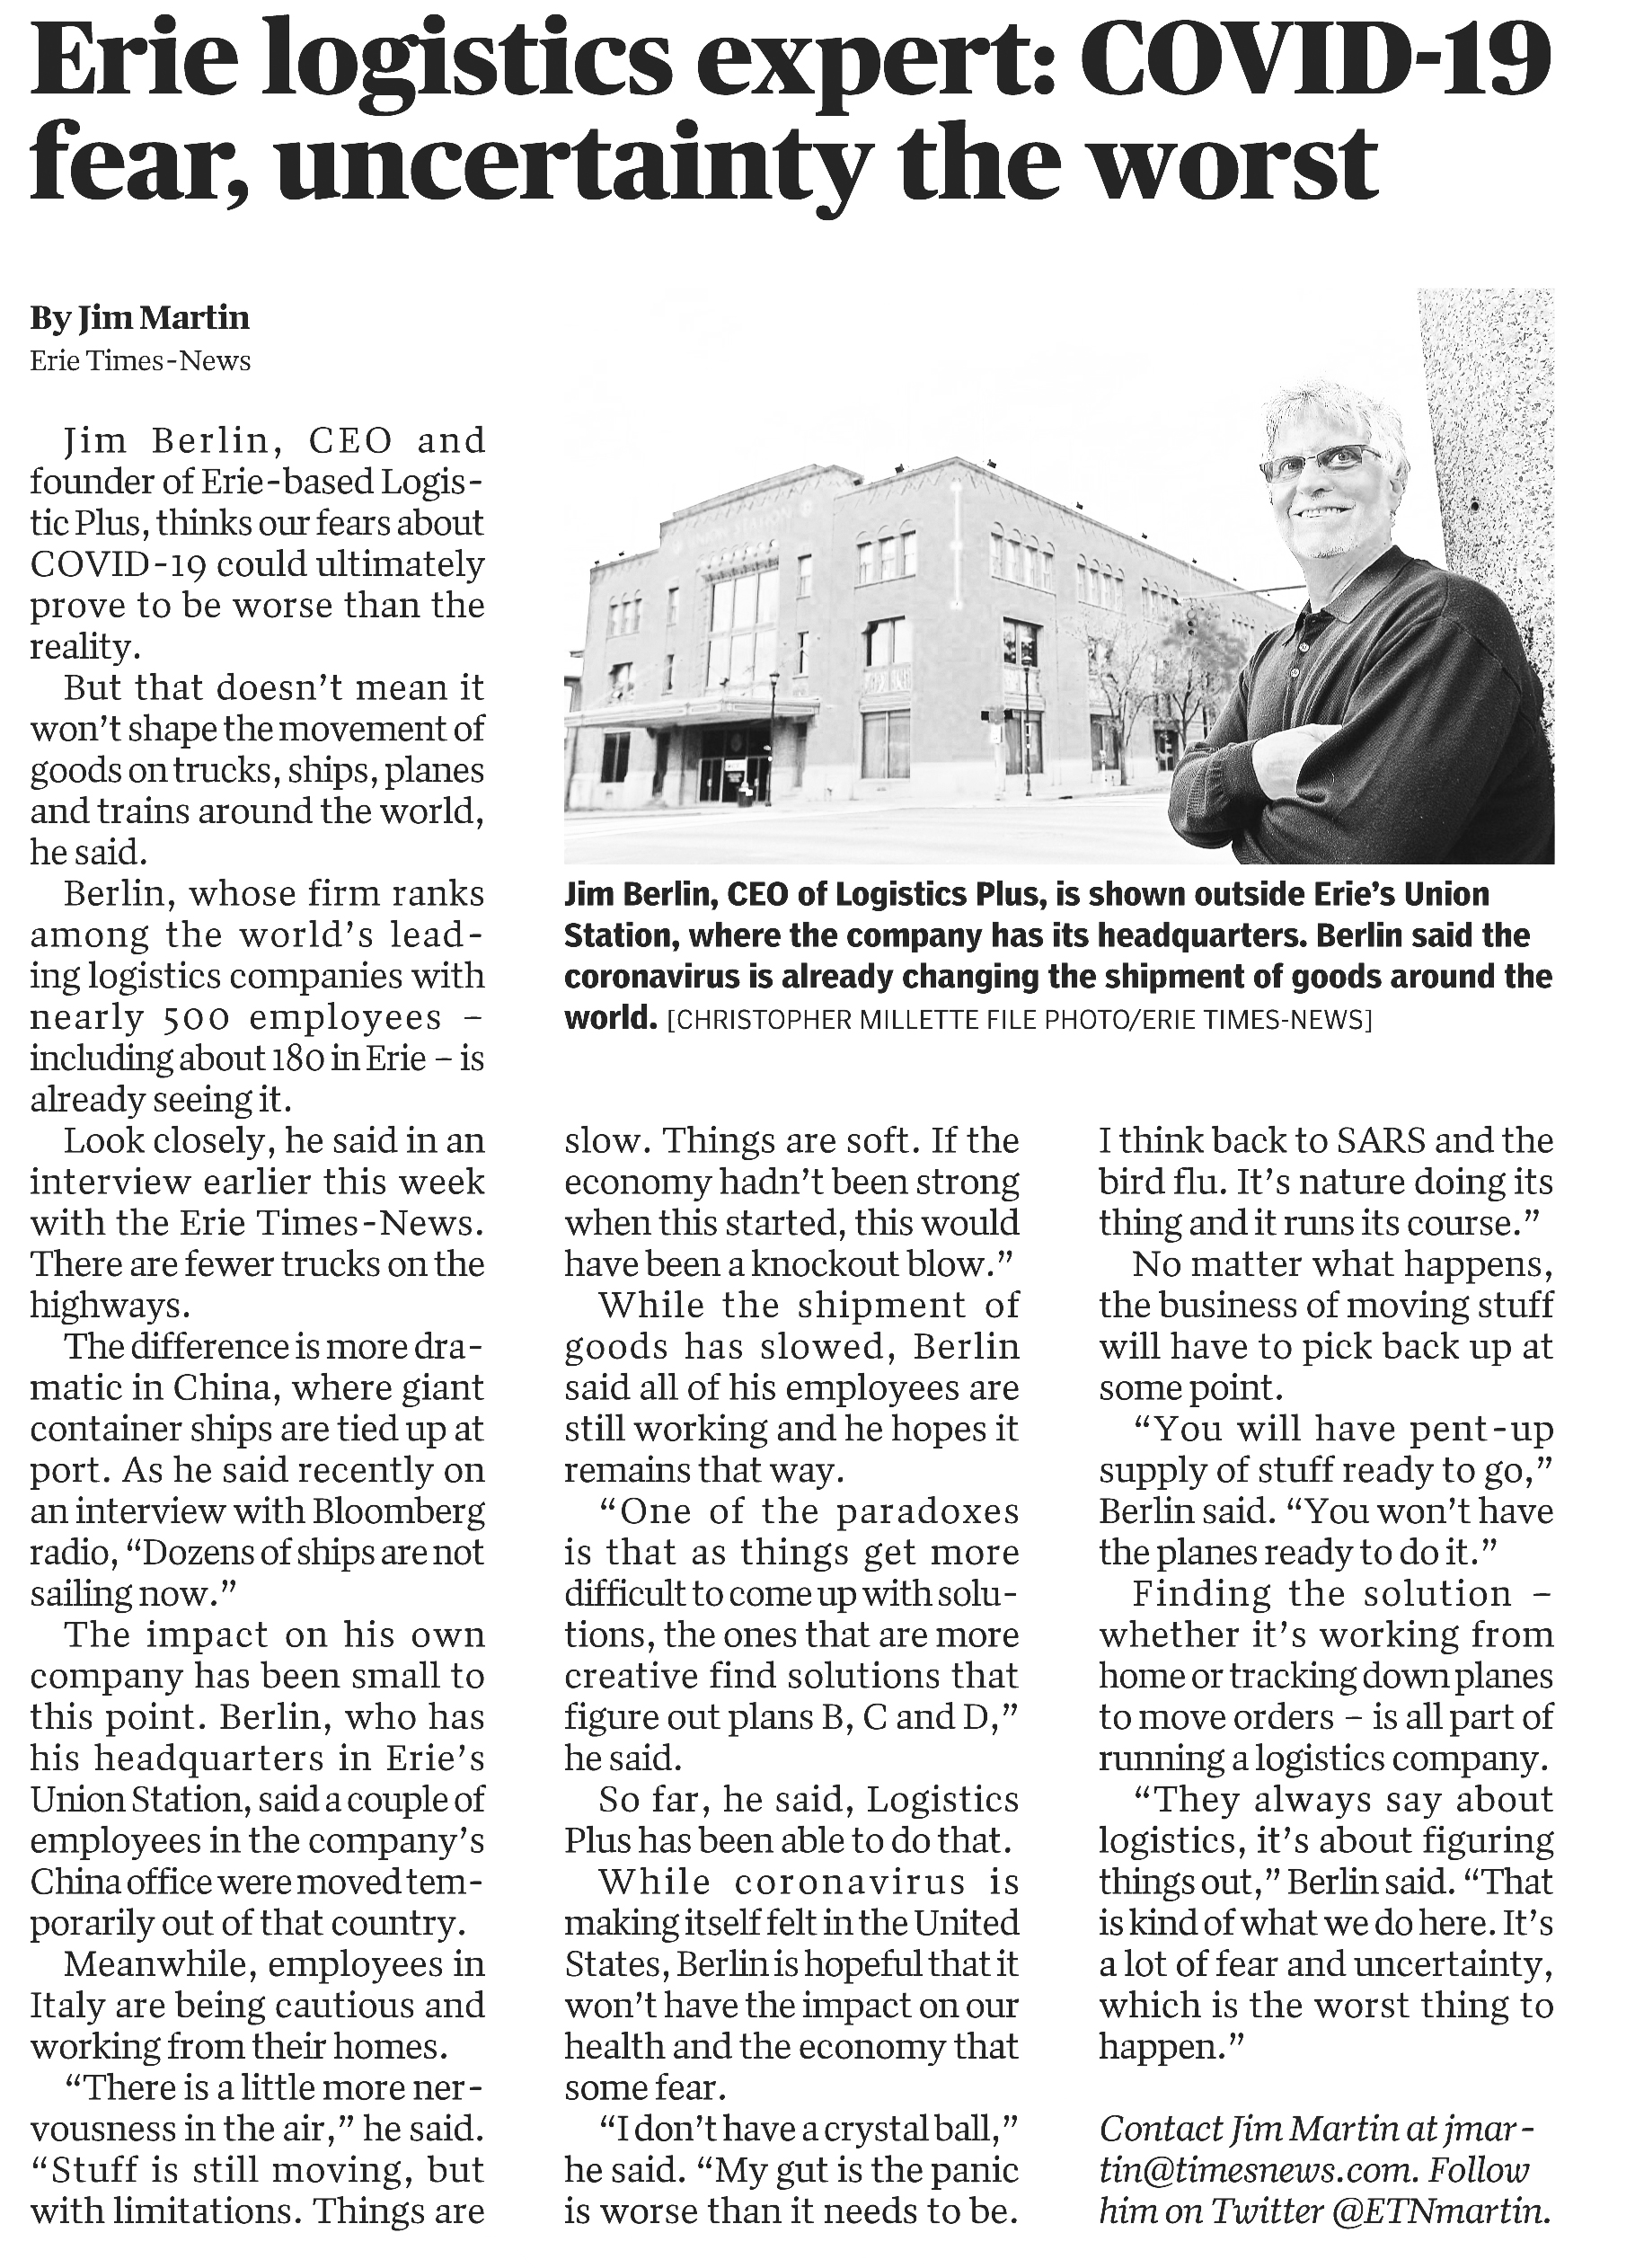 Jim Berlin Comments on COVID-19 in Erie Times-News